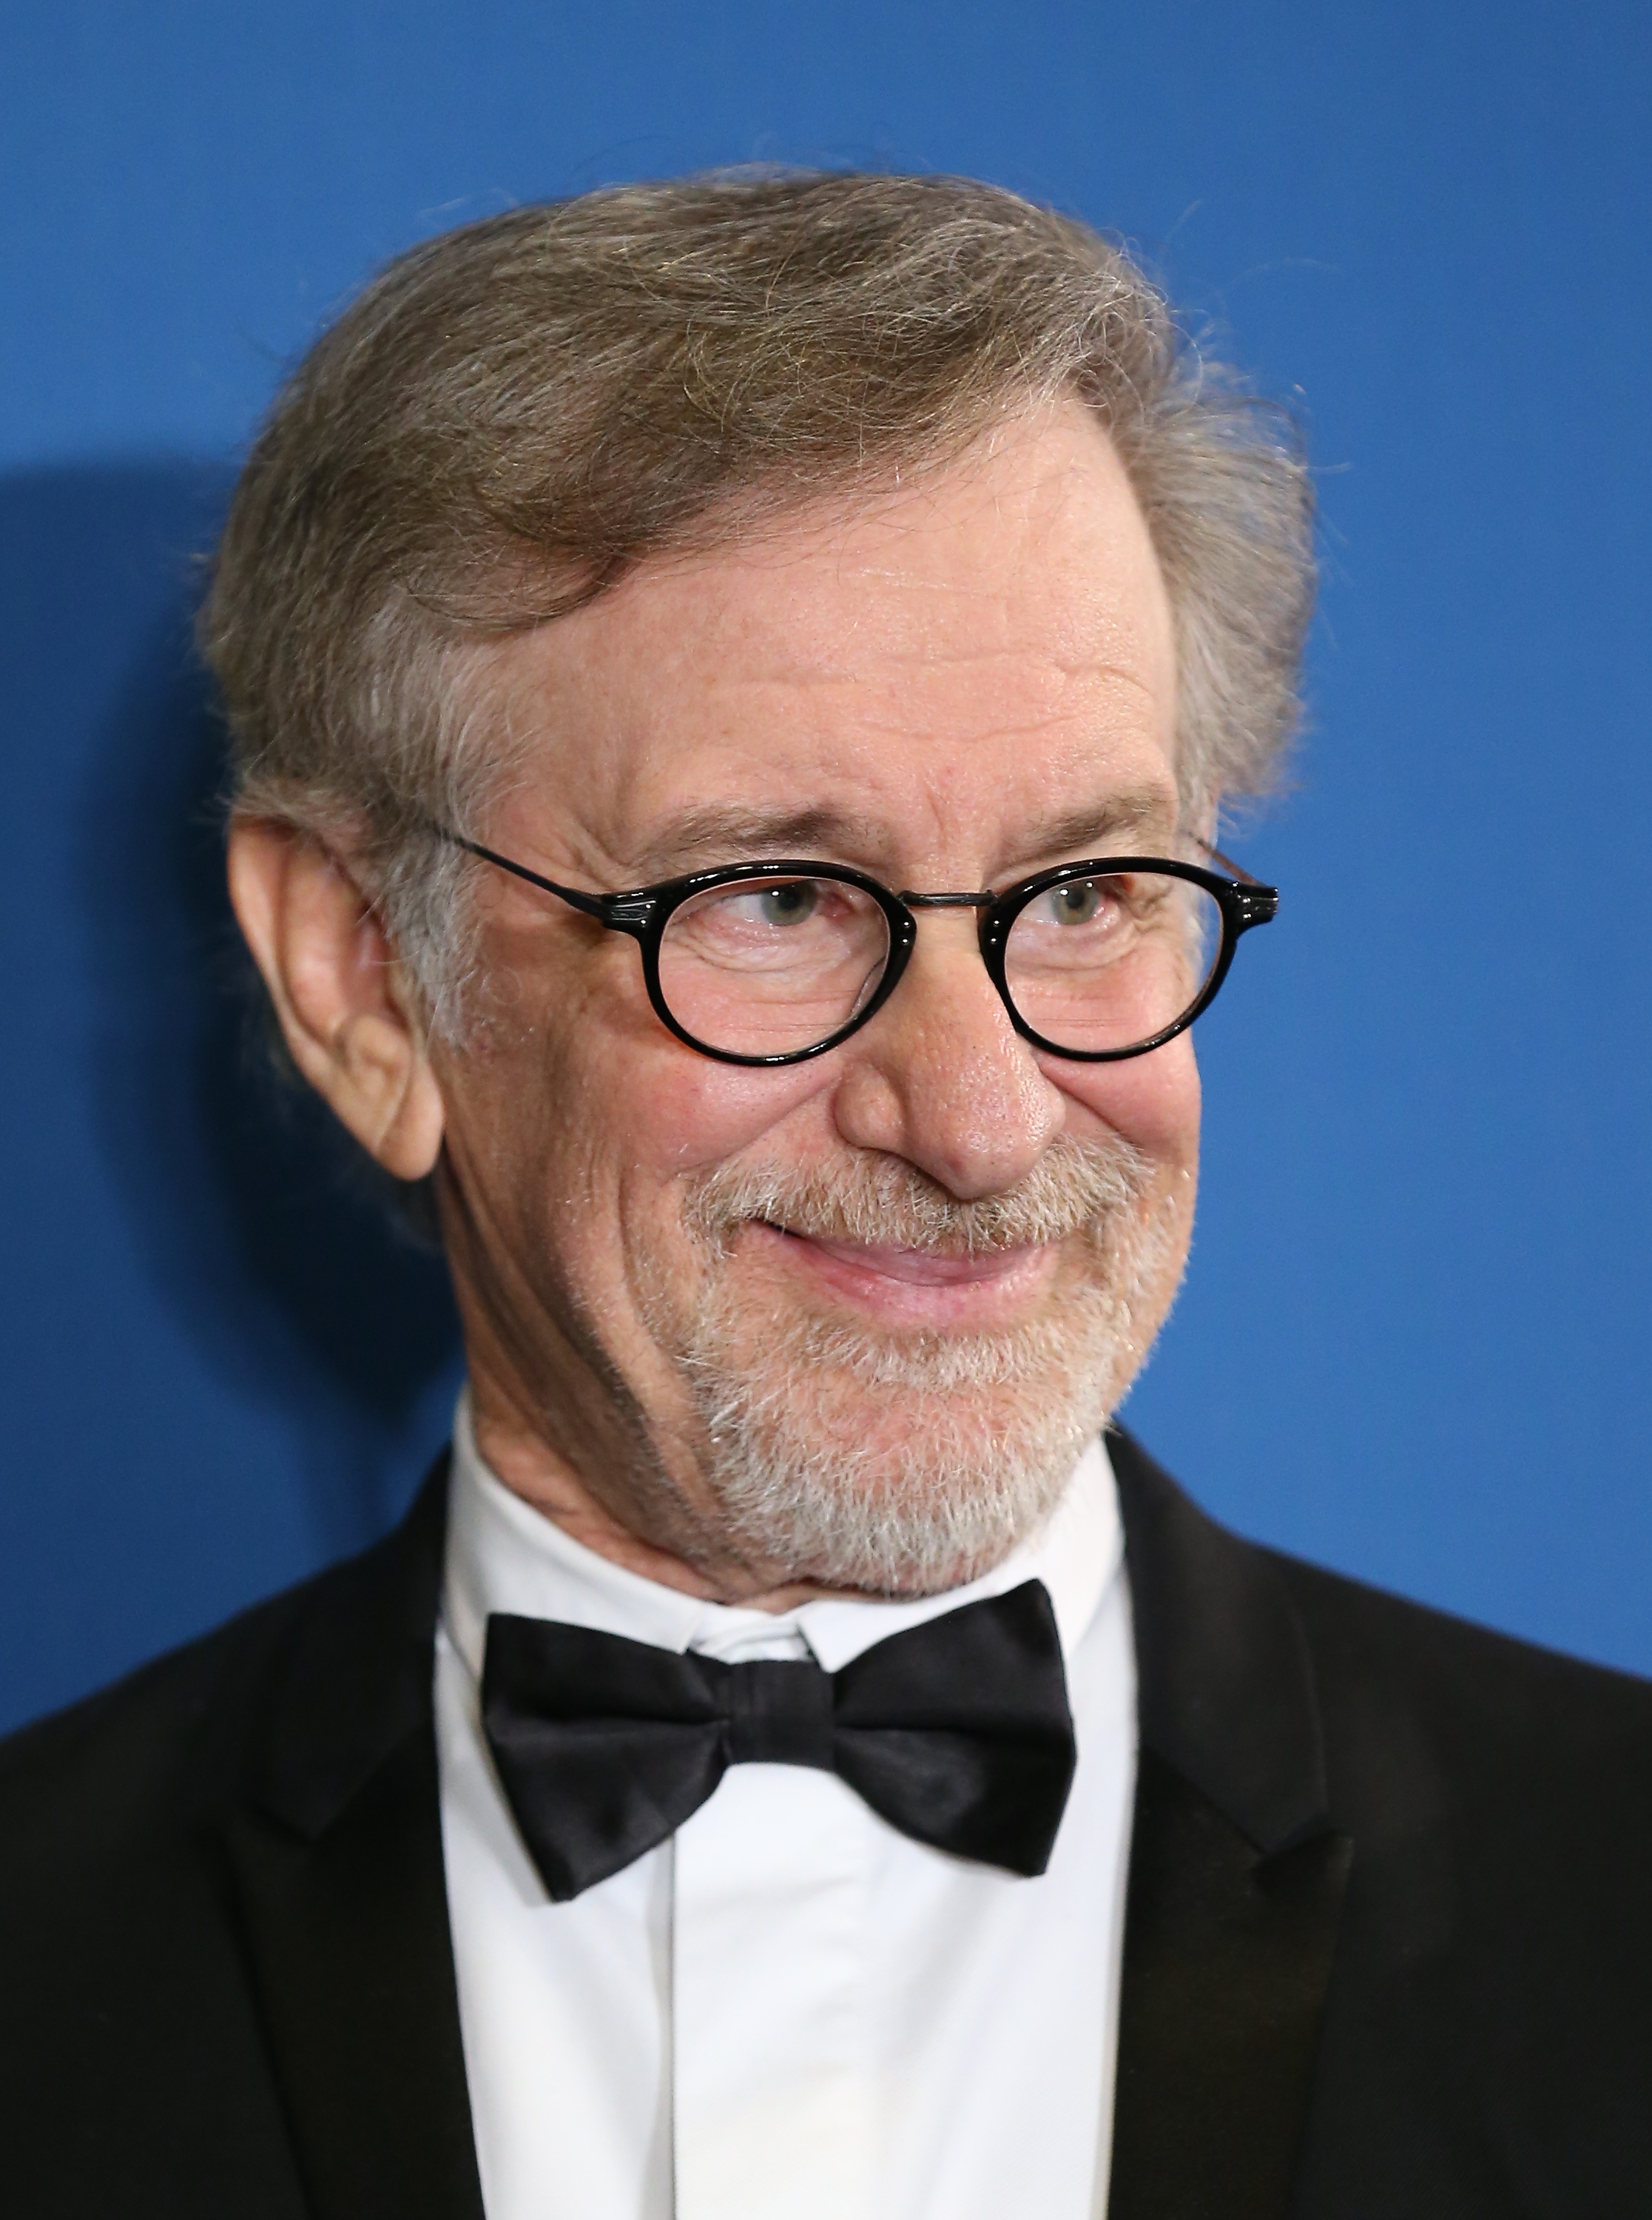 Steven Spielberg at the 67th Annual Directors Guild Of America Awards in Century City, Calif. on Feb. 7, 2015. (JB Lacroix—WireImage/Getty Images)